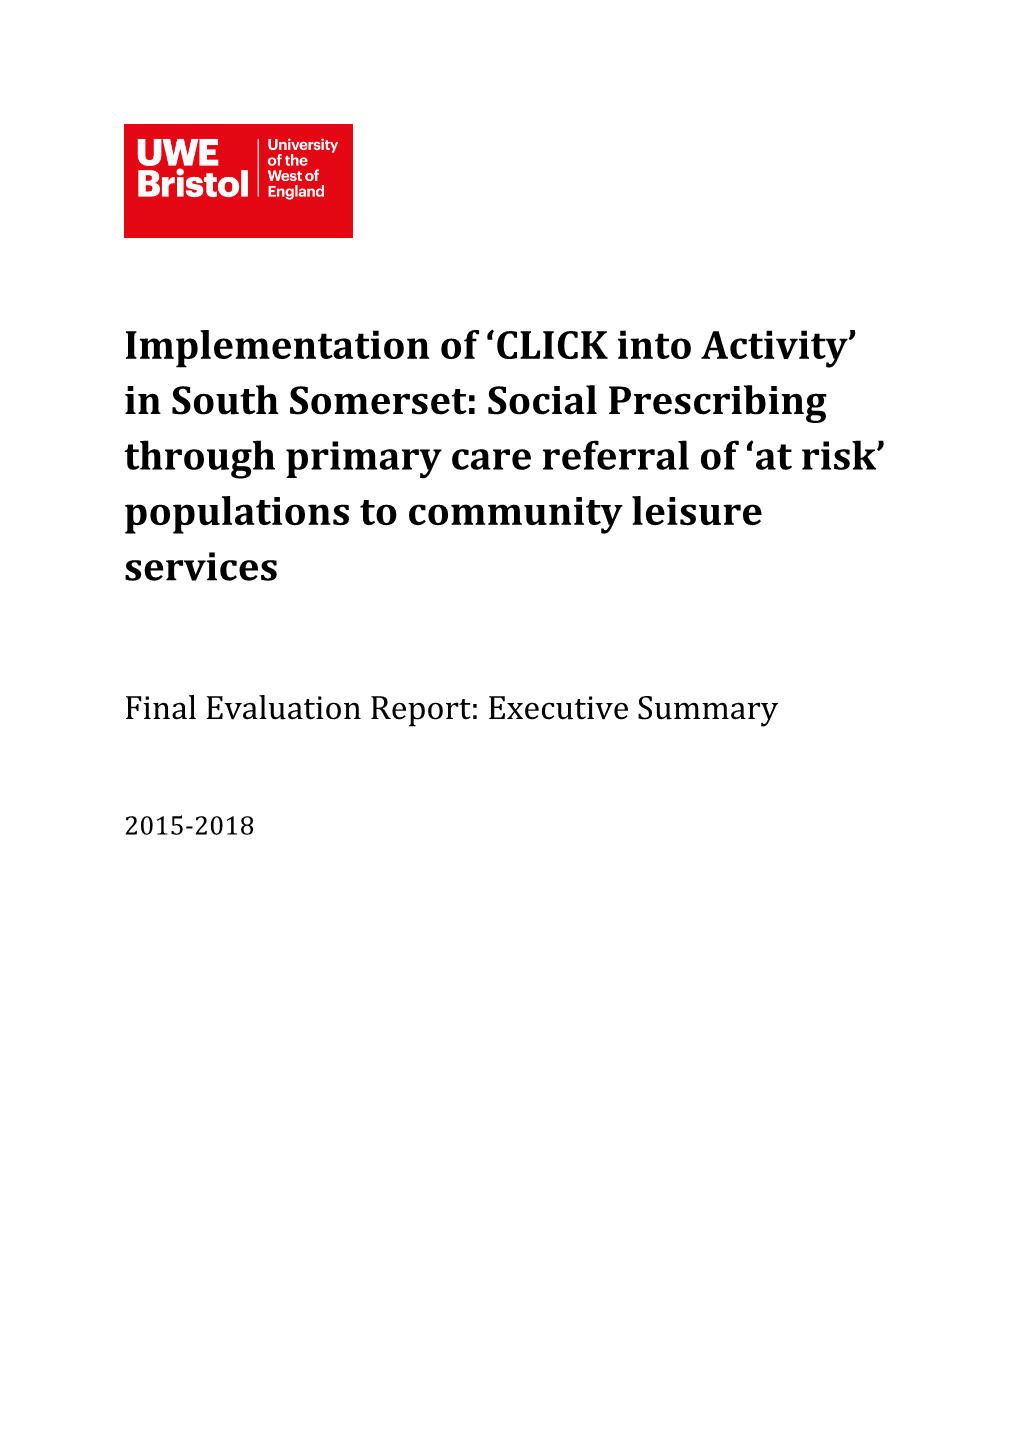 In South Somerset: Social Prescribing Through Primary Care Referral of ‘At Risk’ Populations to Community Leisure Services